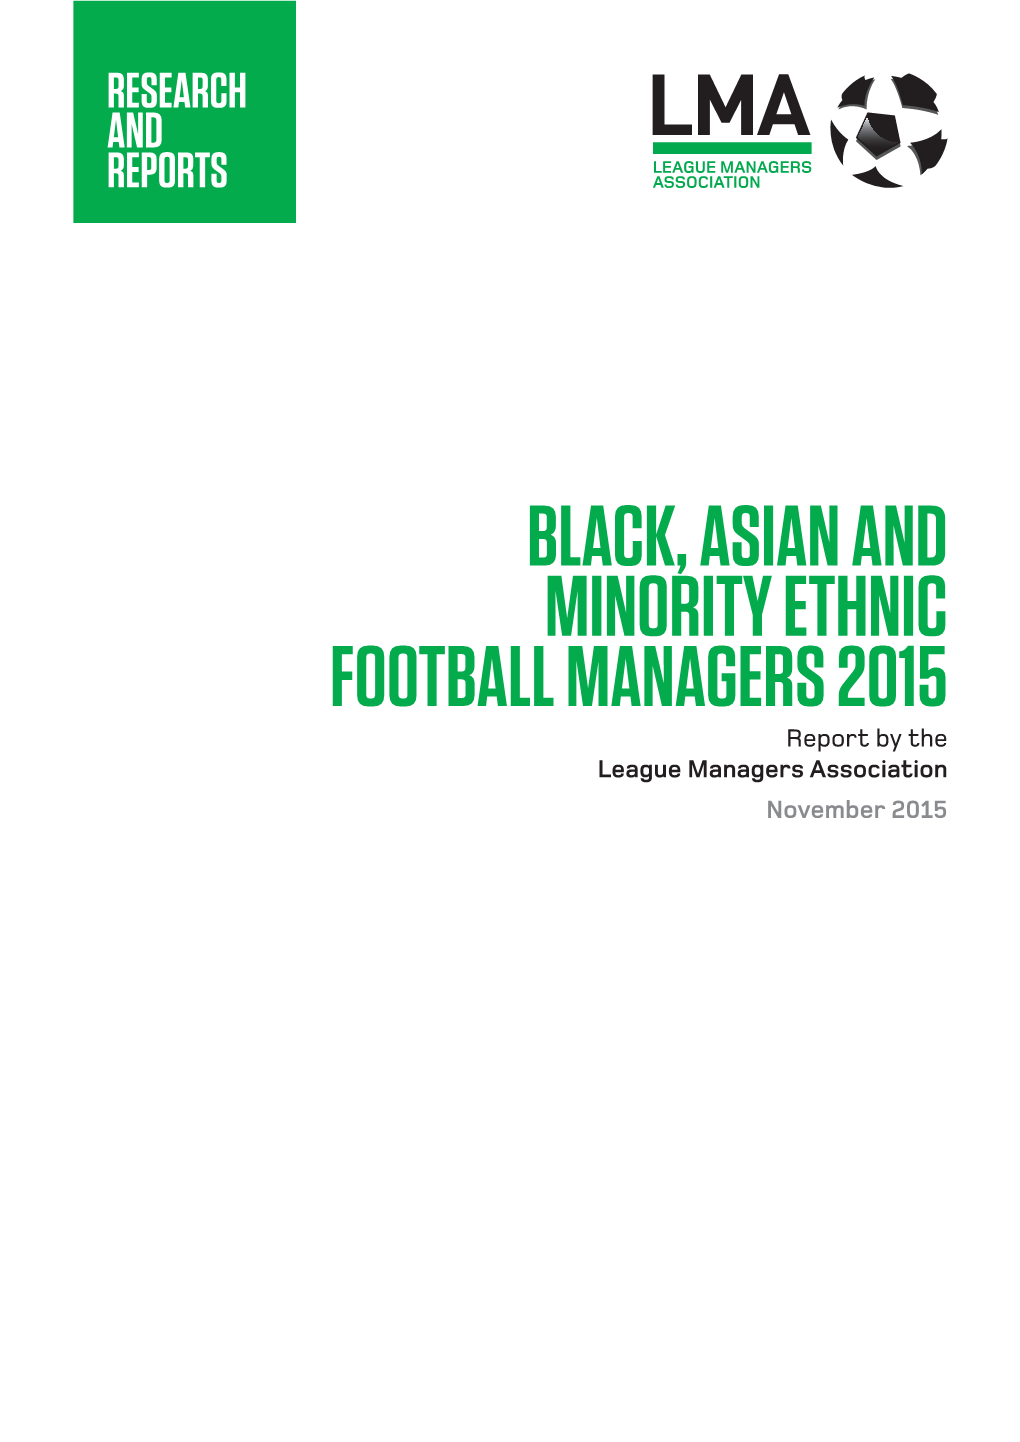 Black, Asian and Minority Ethnic Football Managers